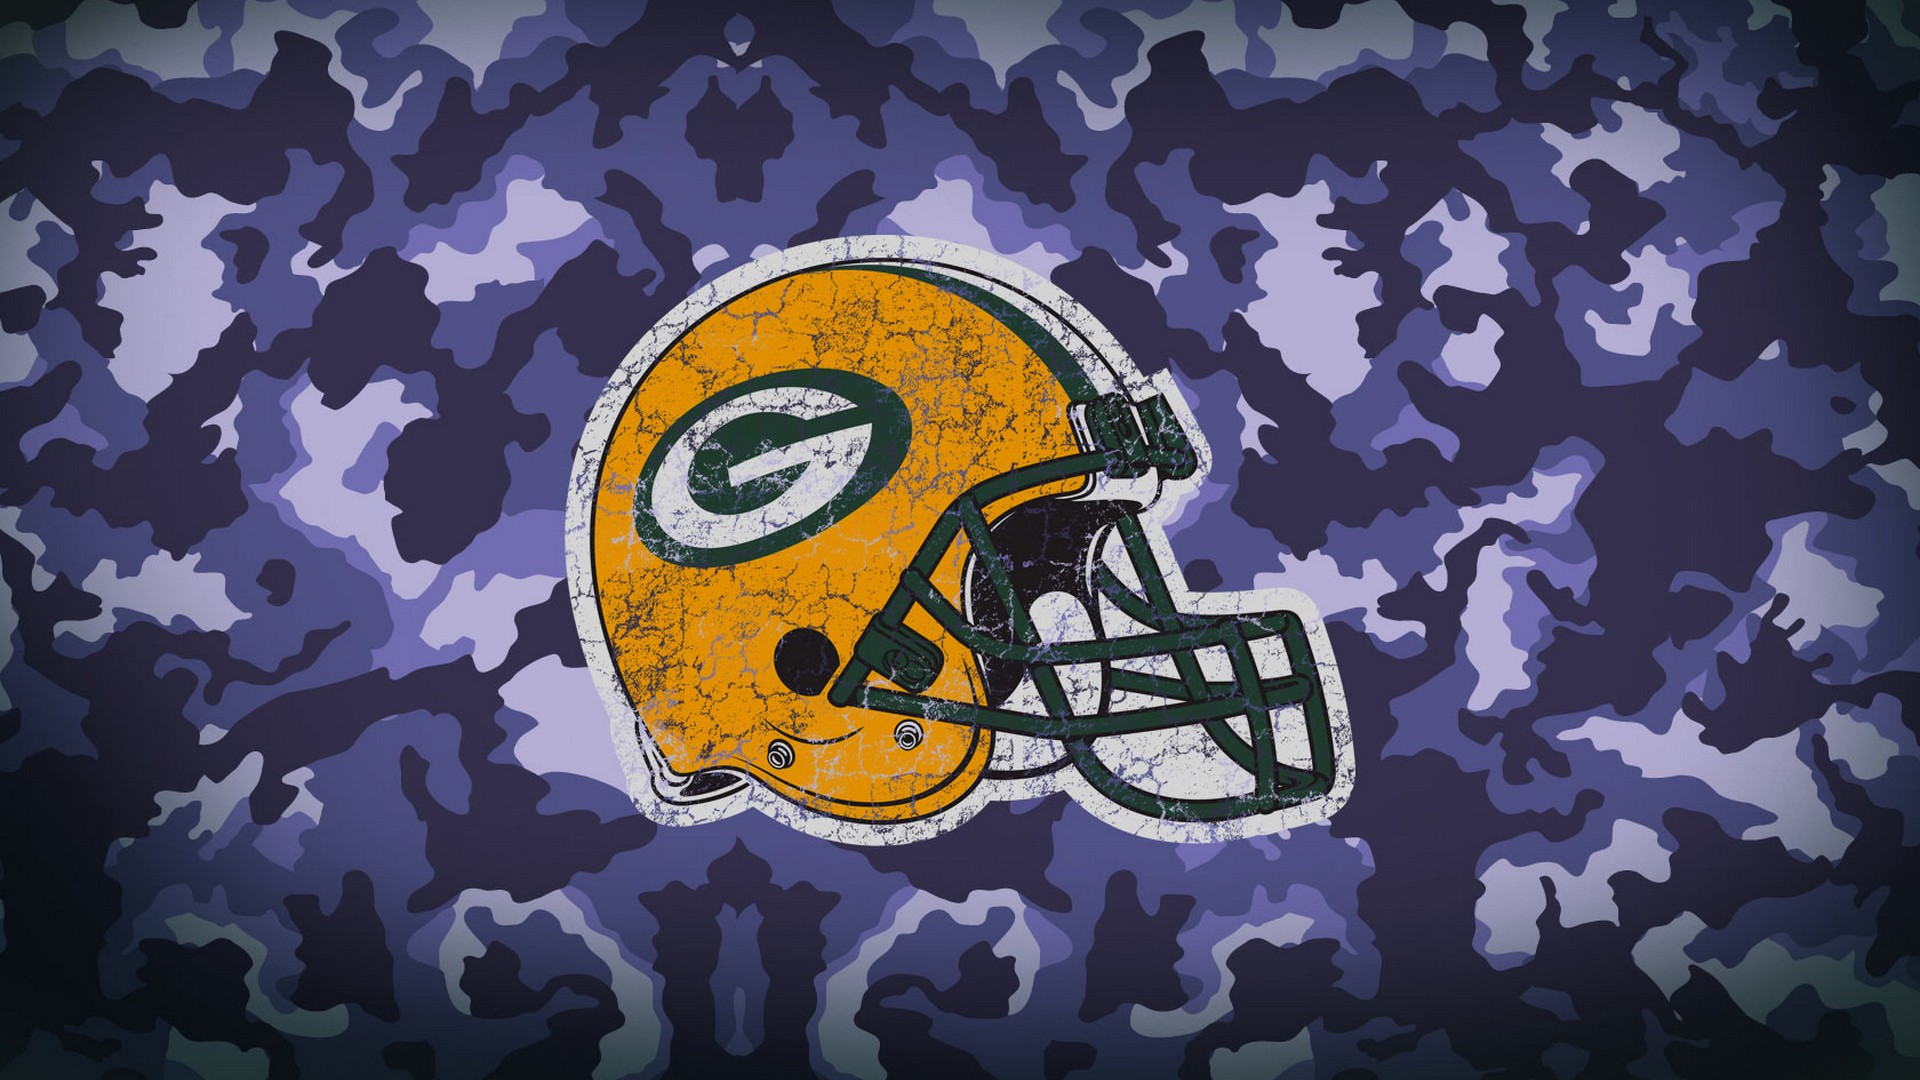 Desktop Wallpapers Green Bay Packers With high-resolution 1920X1080 pixel. Download and set as wallpaper for Desktop Computer, Apple iPhone X, XS Max, XR, 8, 7, 6, SE, iPad, Android